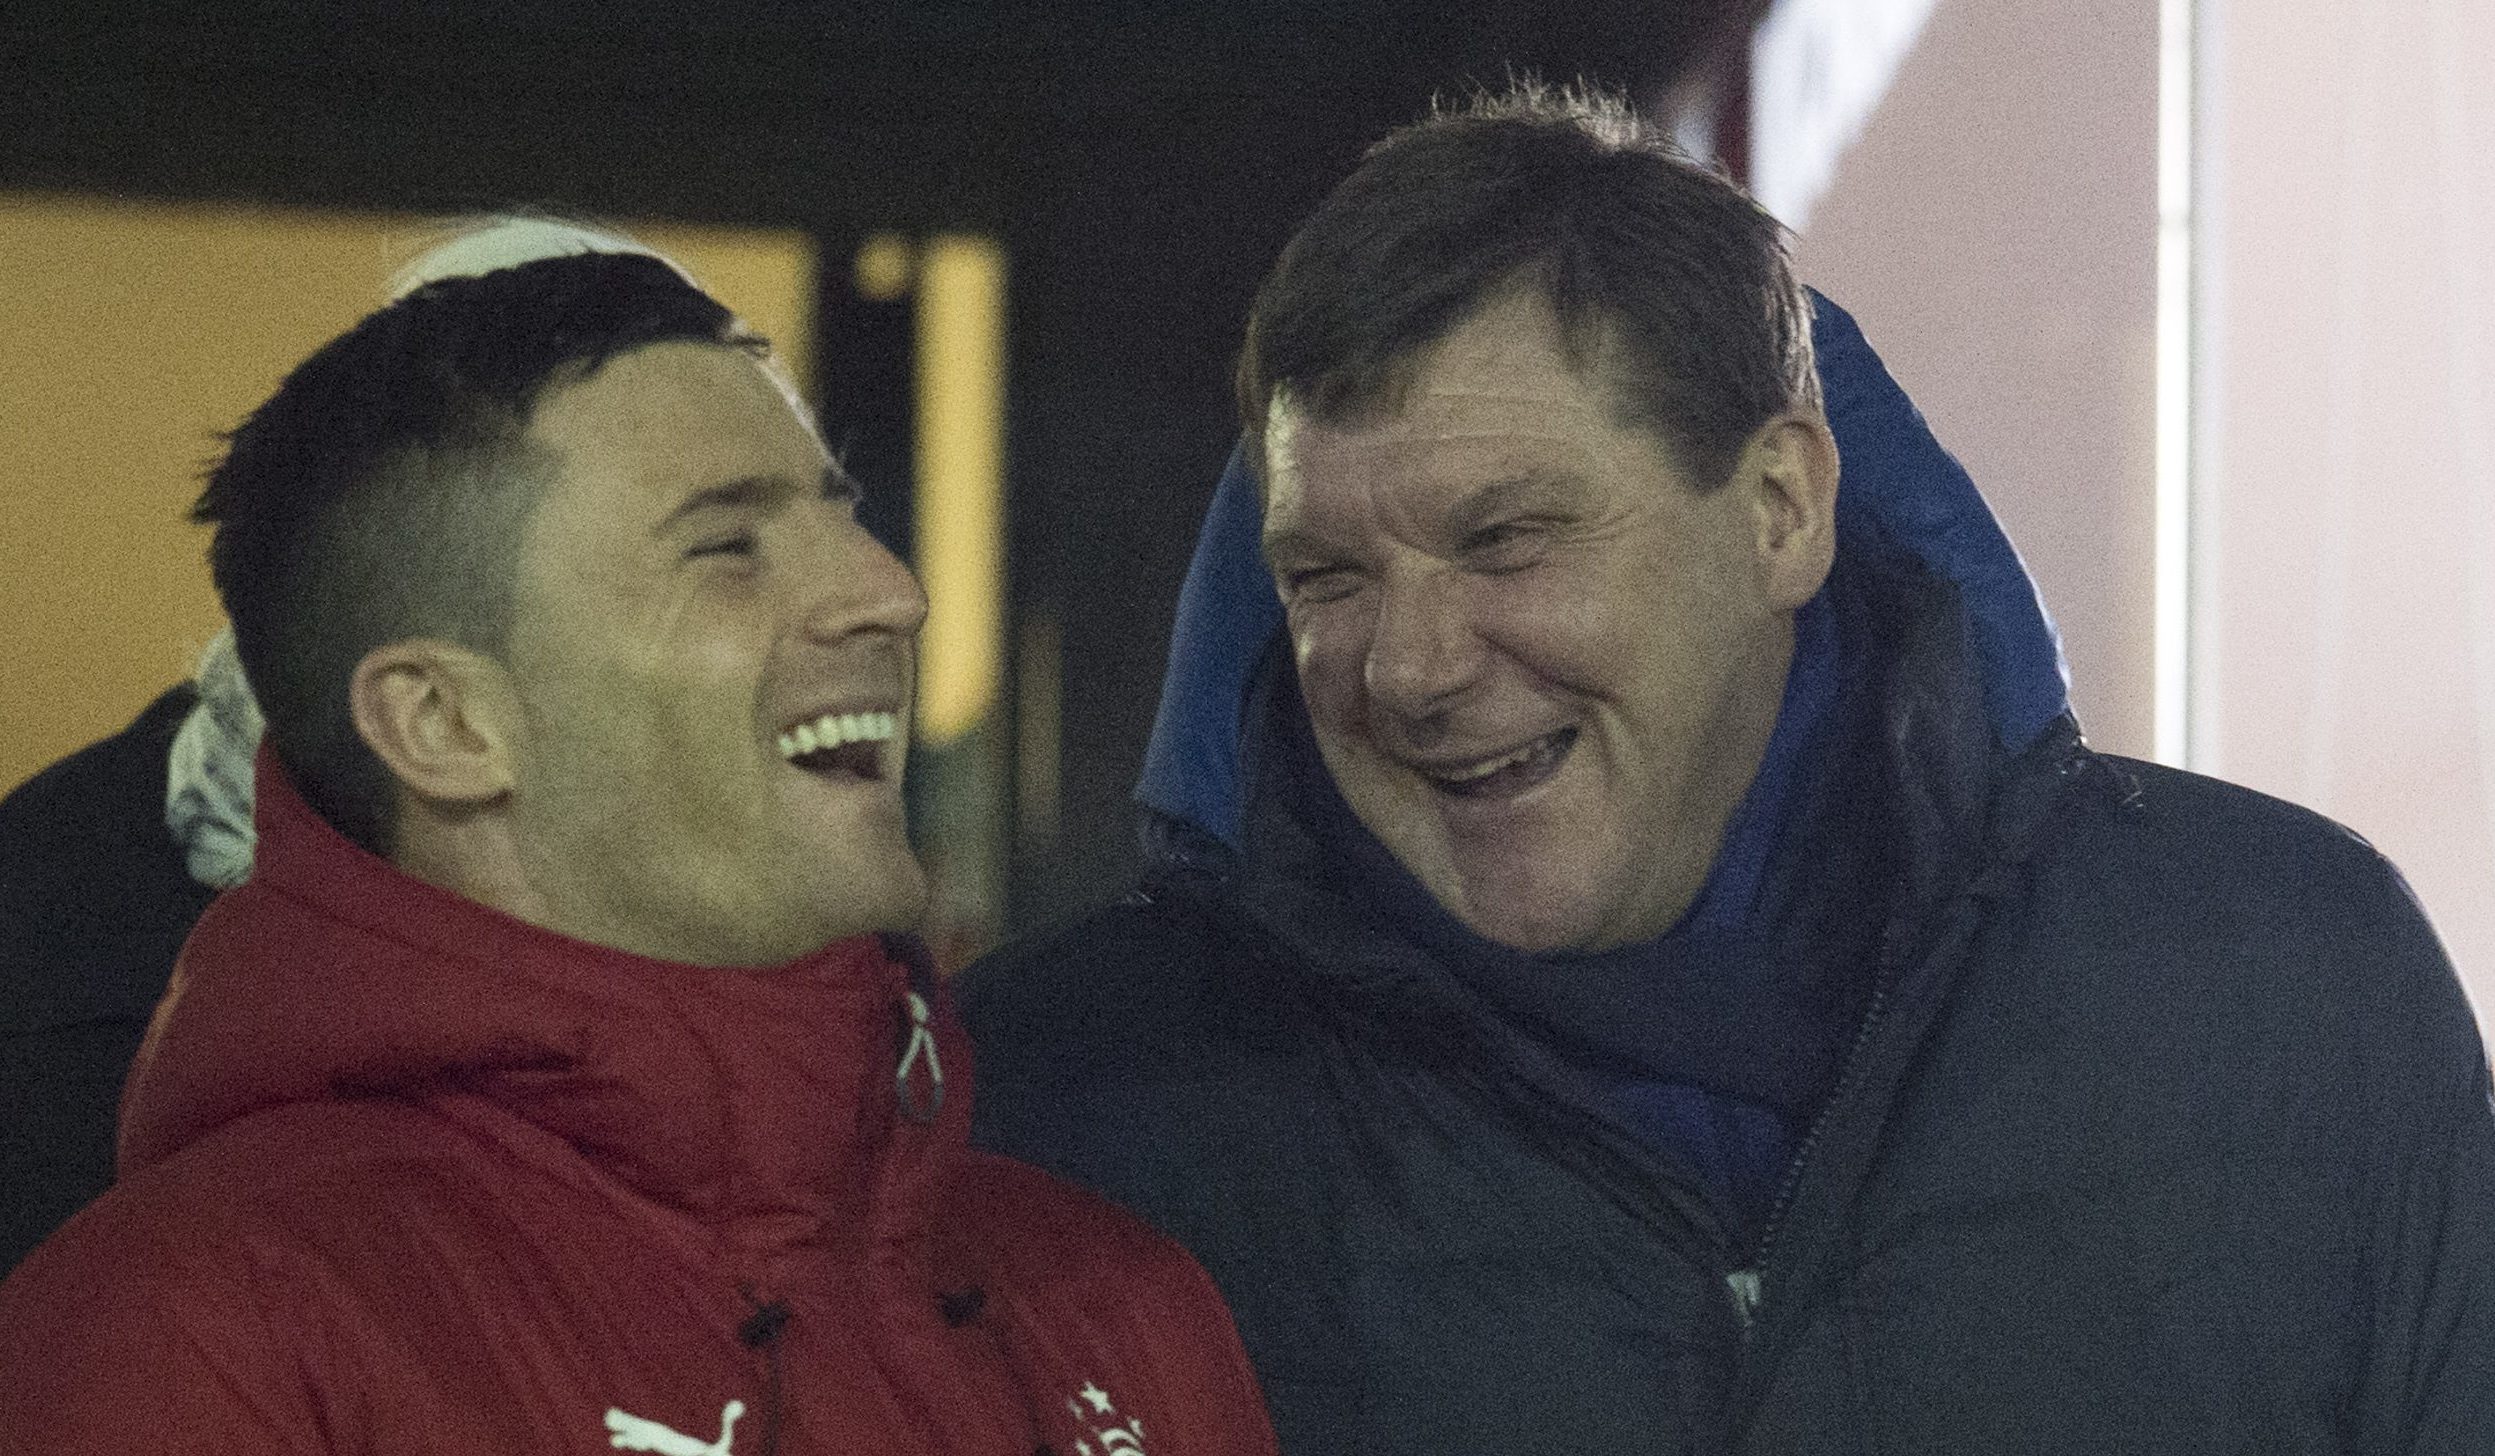 Michael O’Halloran shares a laugh with Tommy Wright.